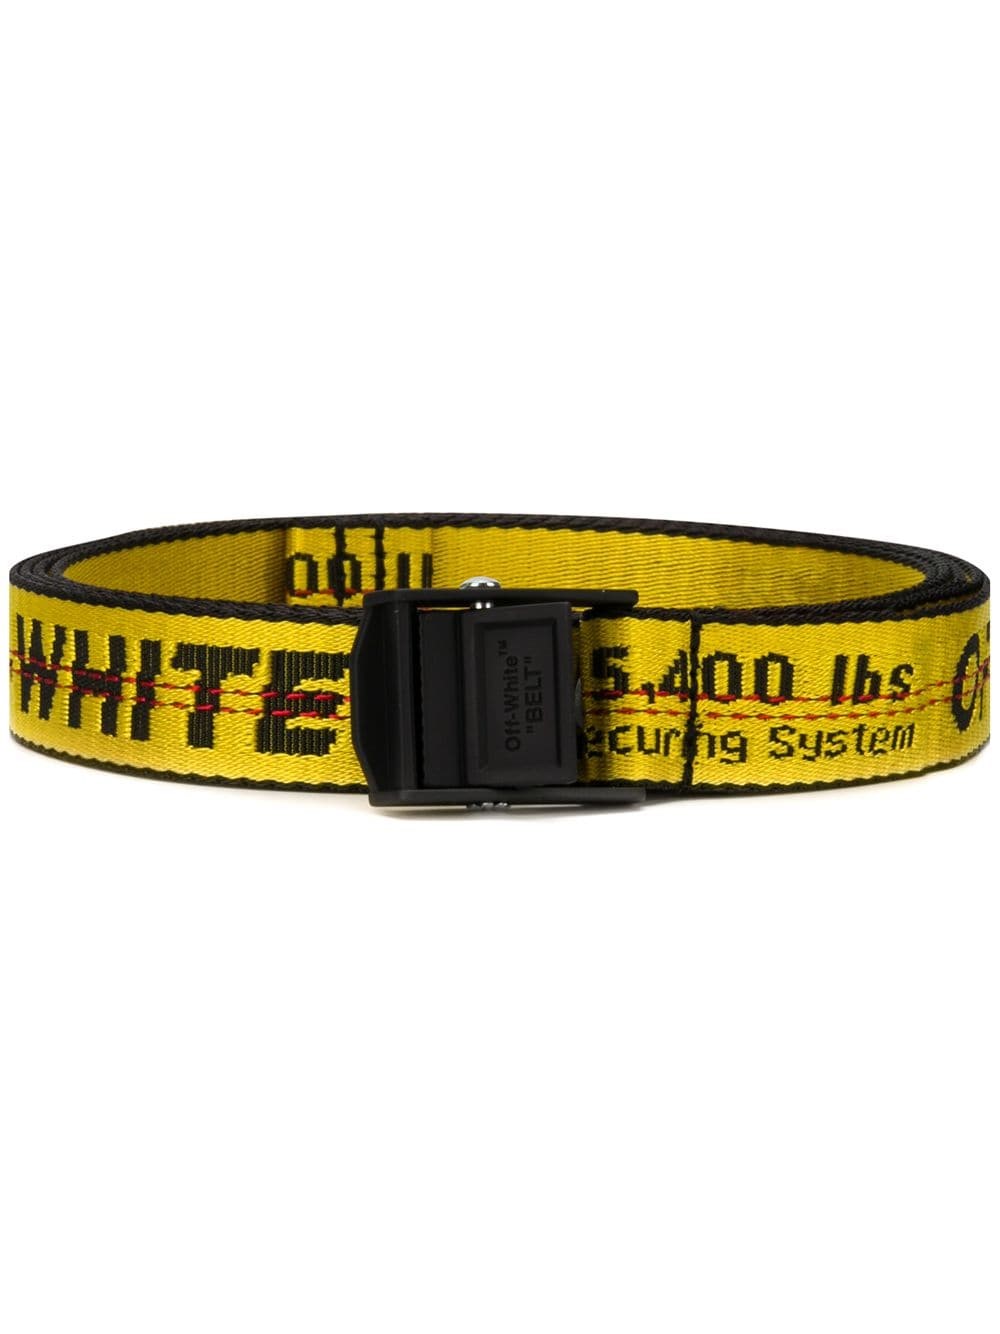 off-white MINI INDUSTRIAL BELT available on montiboutique.com - 32401